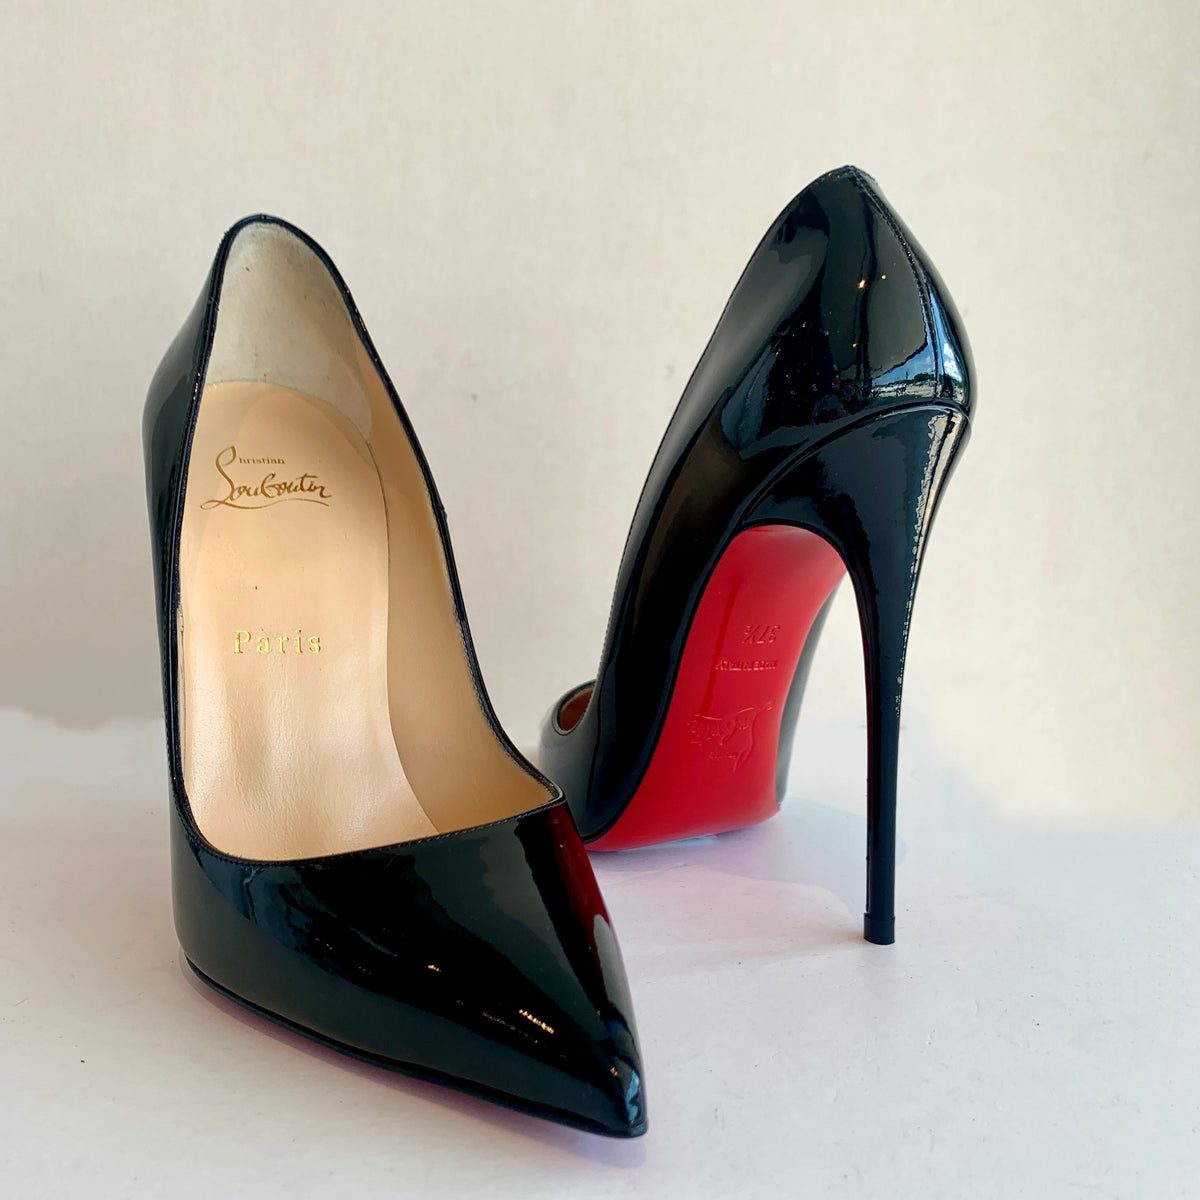 Christian Louboutin Metallic Red So Kate 120 Patent Leather Pumps